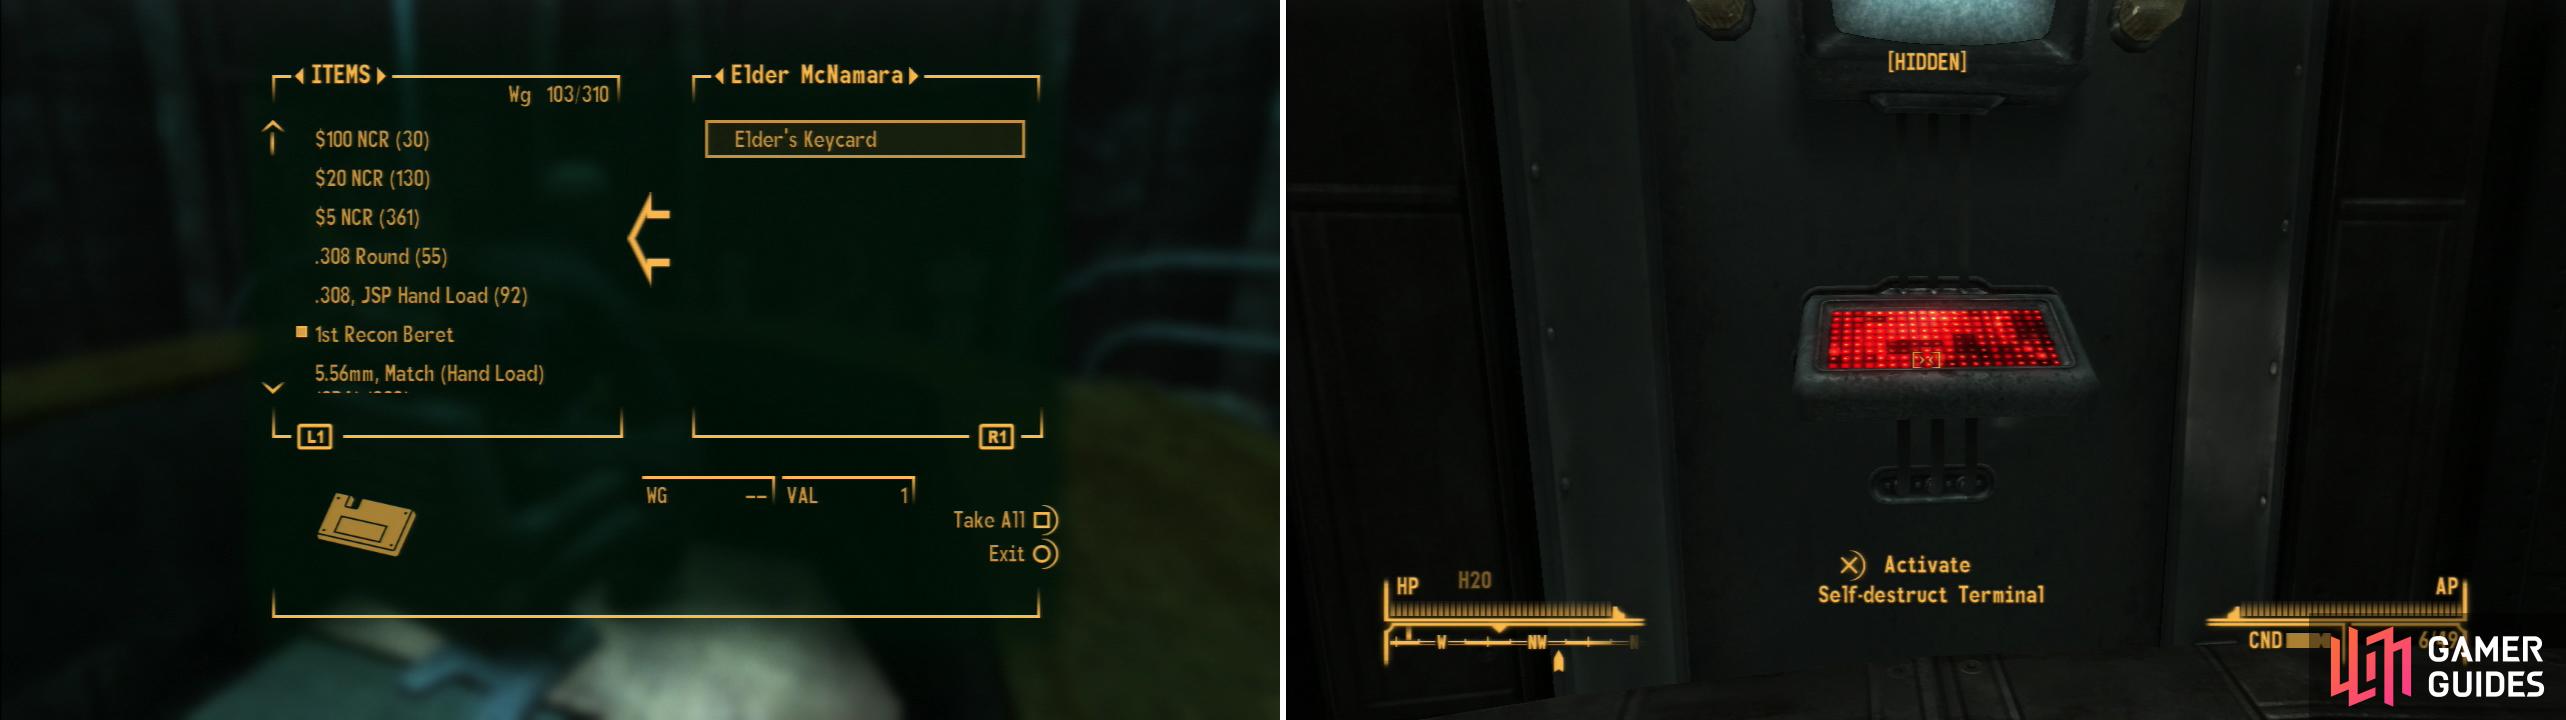 Steal each of the three Keycards you need to generate a self-destruct password (left). Then, with the password handy, activate the self-destruct terminal and put an end to the Mojave chapter of the Brotherhood of Steel (right).